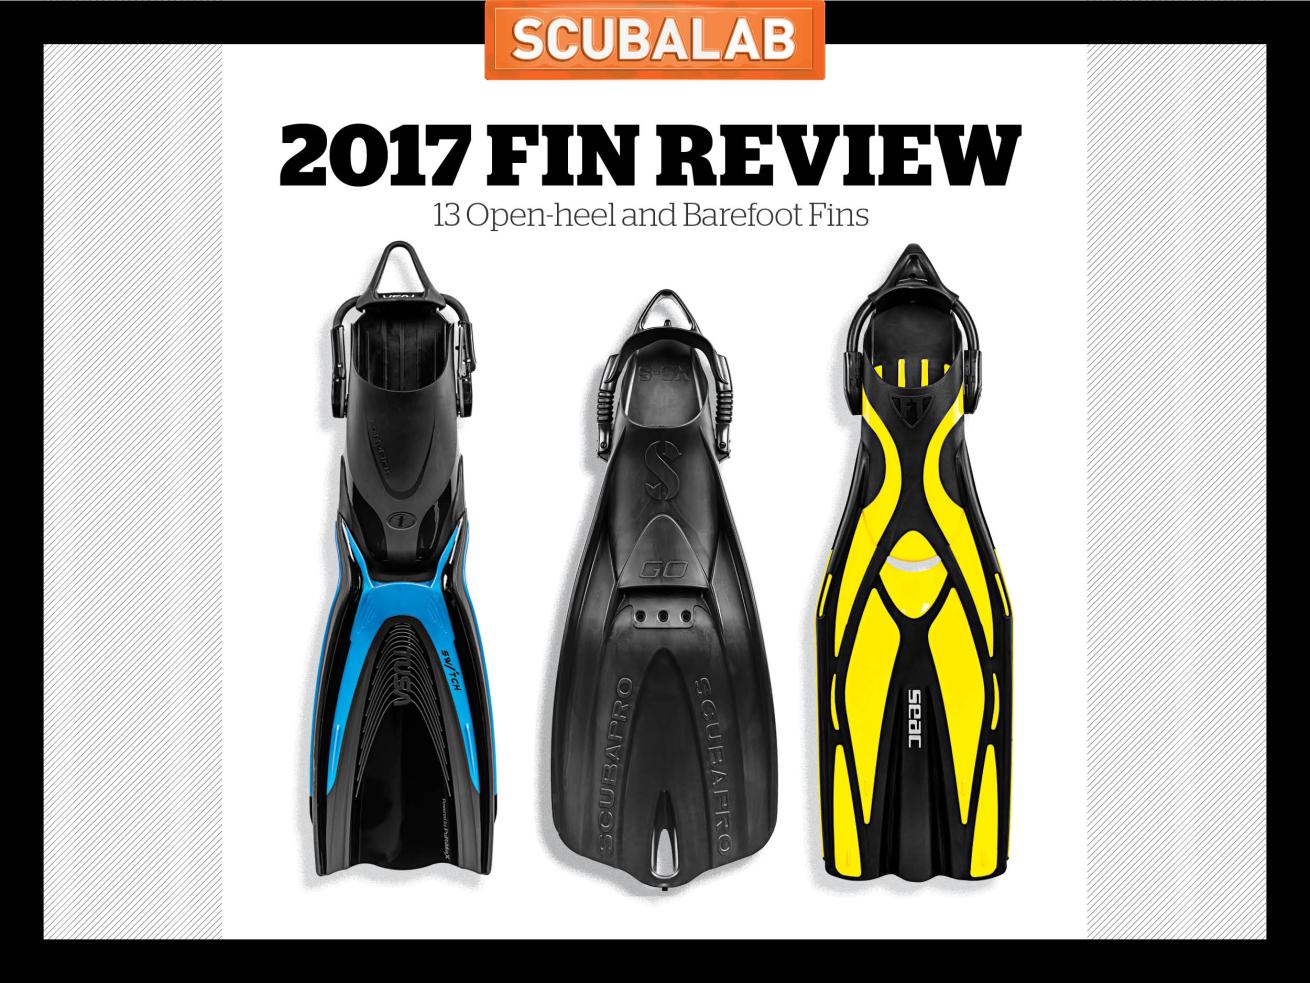 ScubaLab 2017 Scuba Diving Fin Gear Review and Test